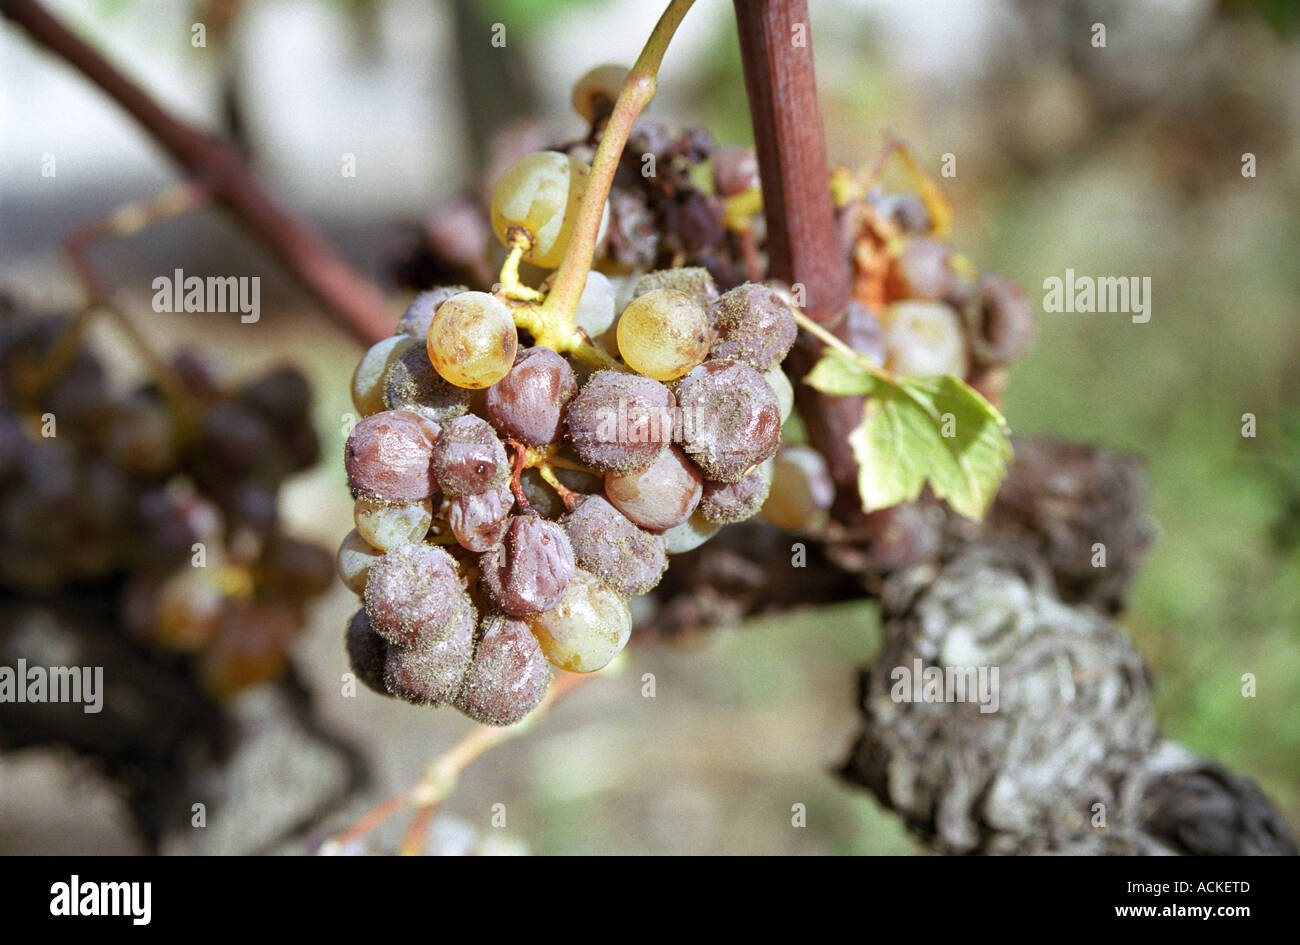 Semillon grapes with noble rot.   at harvest time  Chateau Raymond Lafon, Meslier, Sauternes, Bordeaux, Aquitaine, Gironde, France, Europe Stock Photo